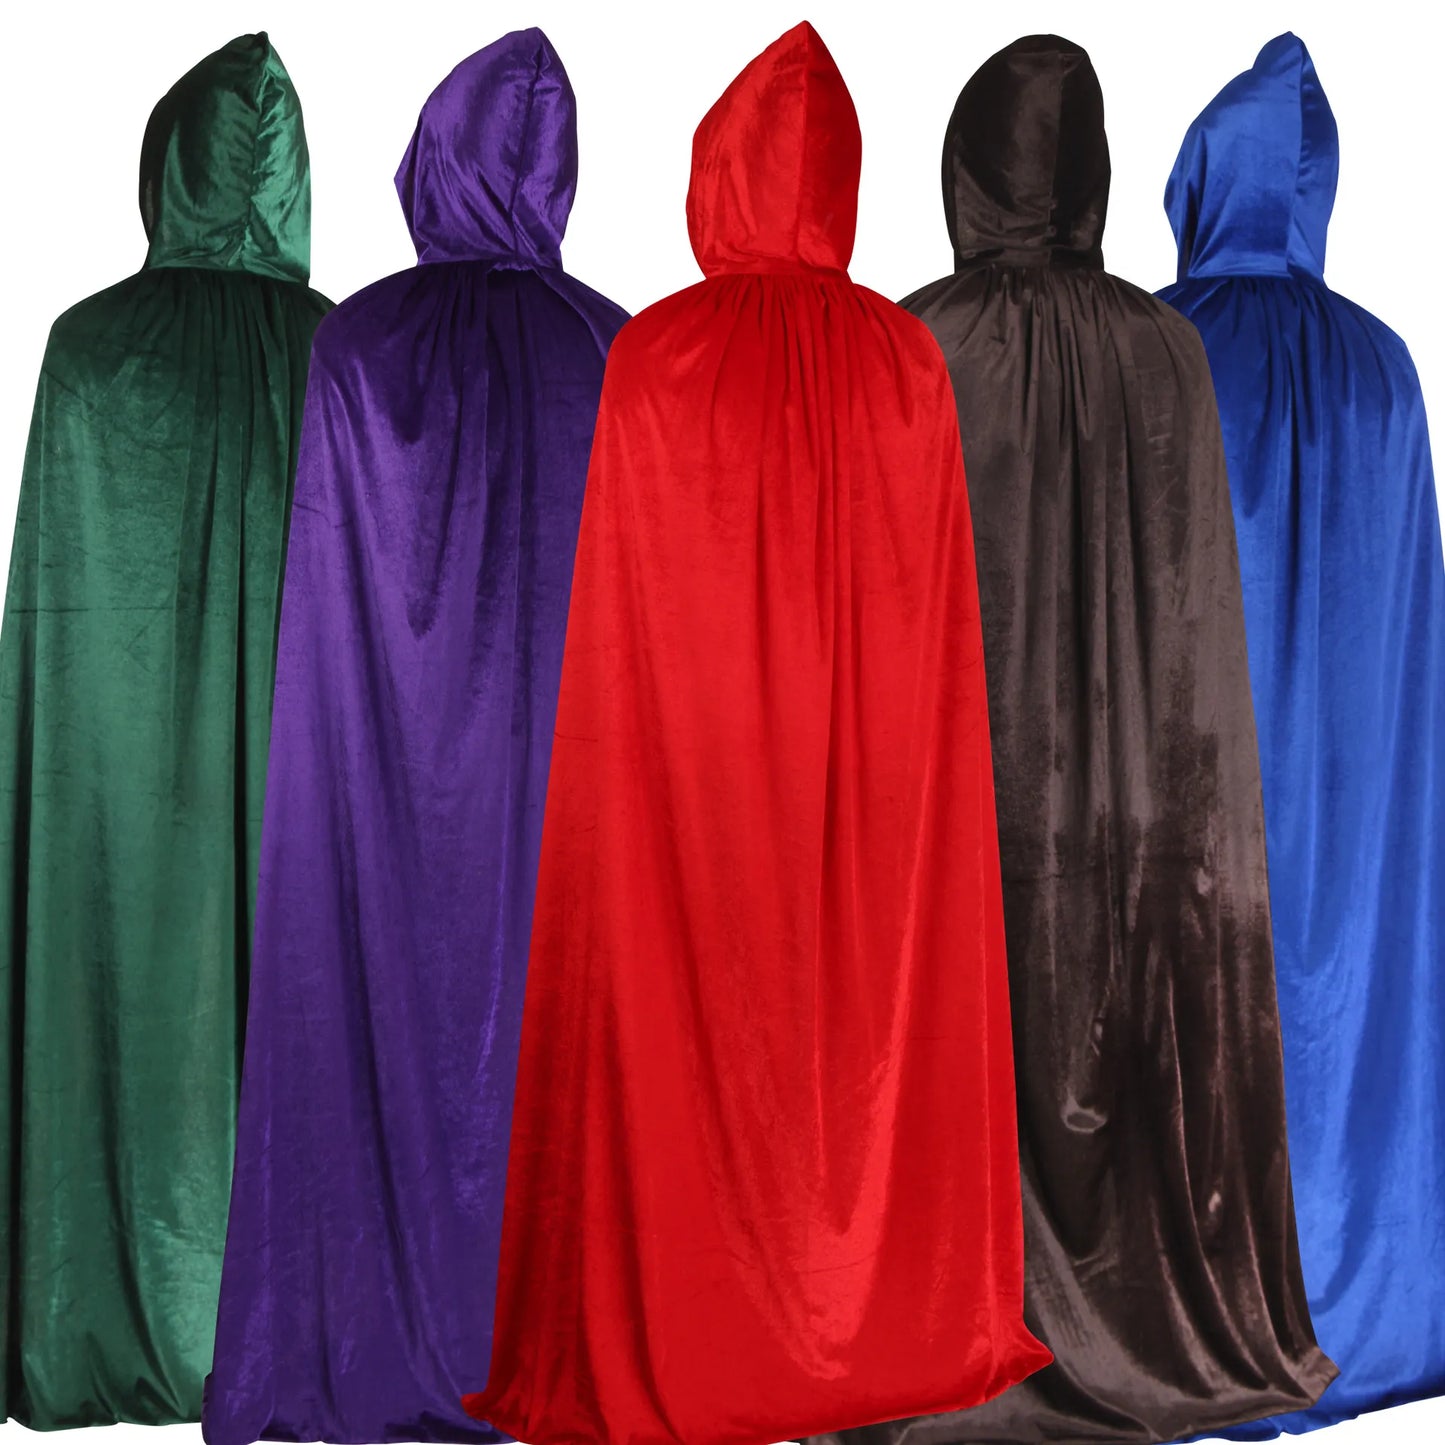 Medieval Cape - One Size Fits All